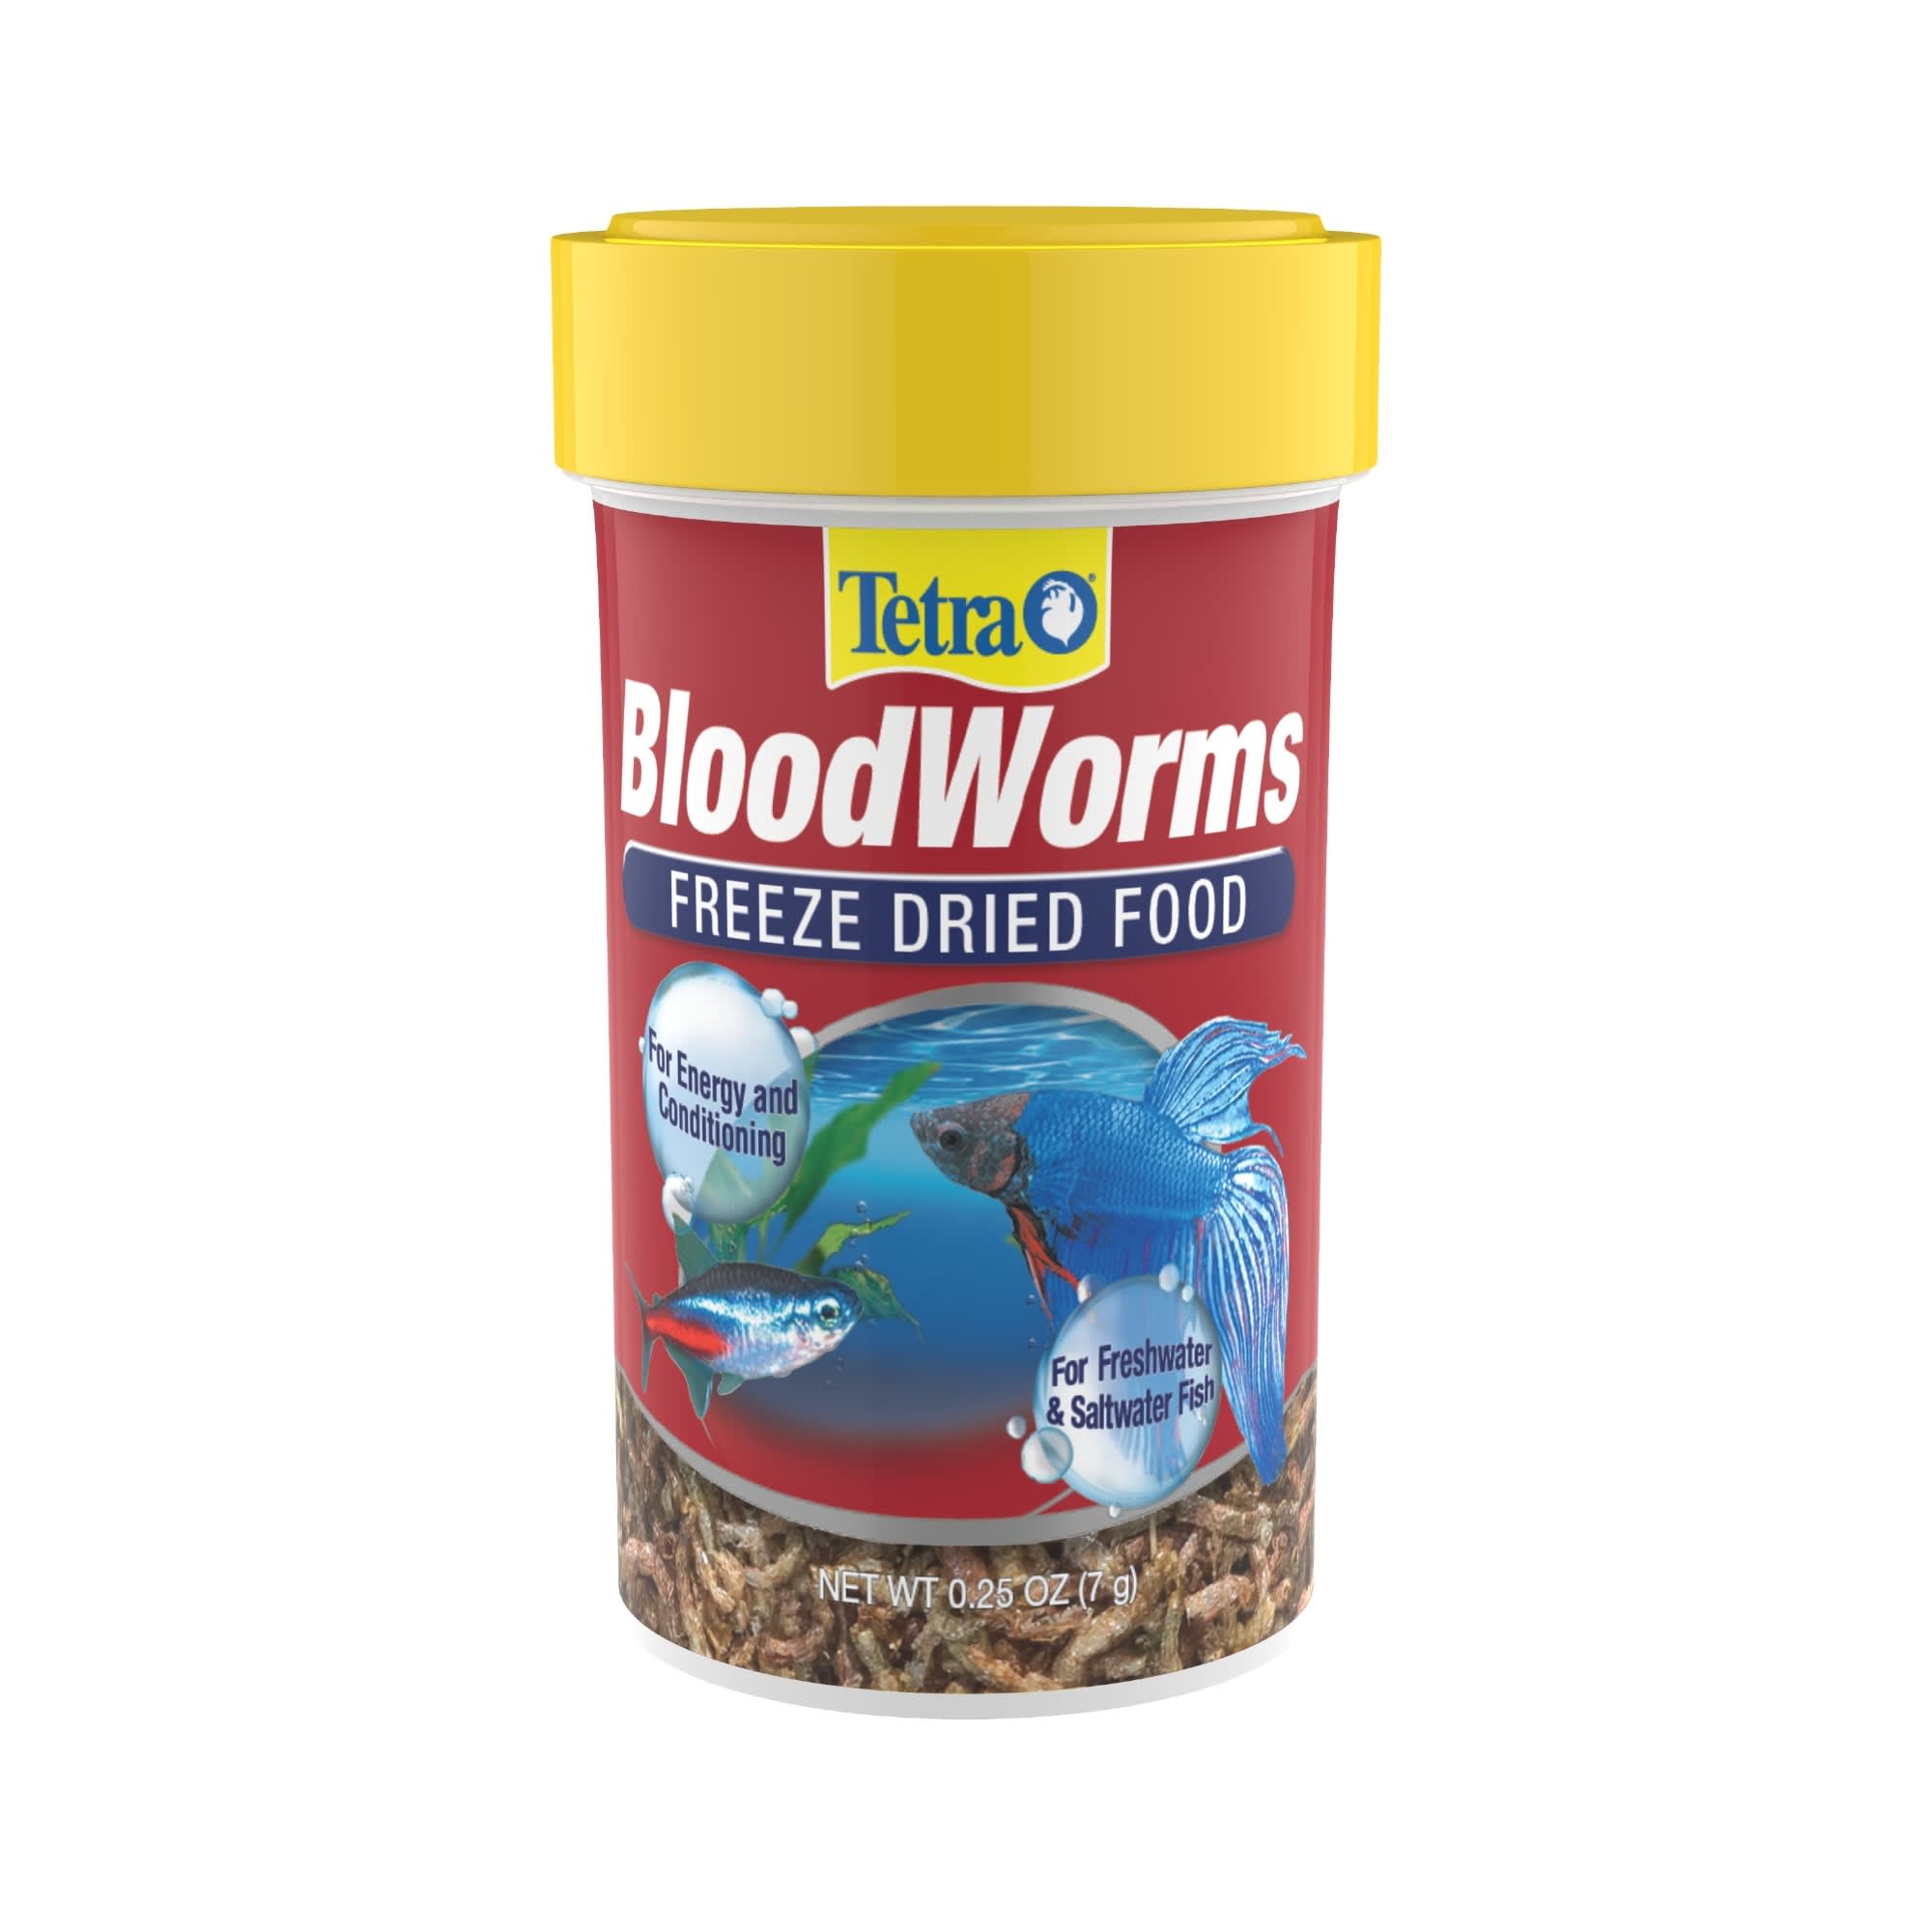 Tetra Bloodworms Freeze-Dried Food For Freshwater And Saltwater